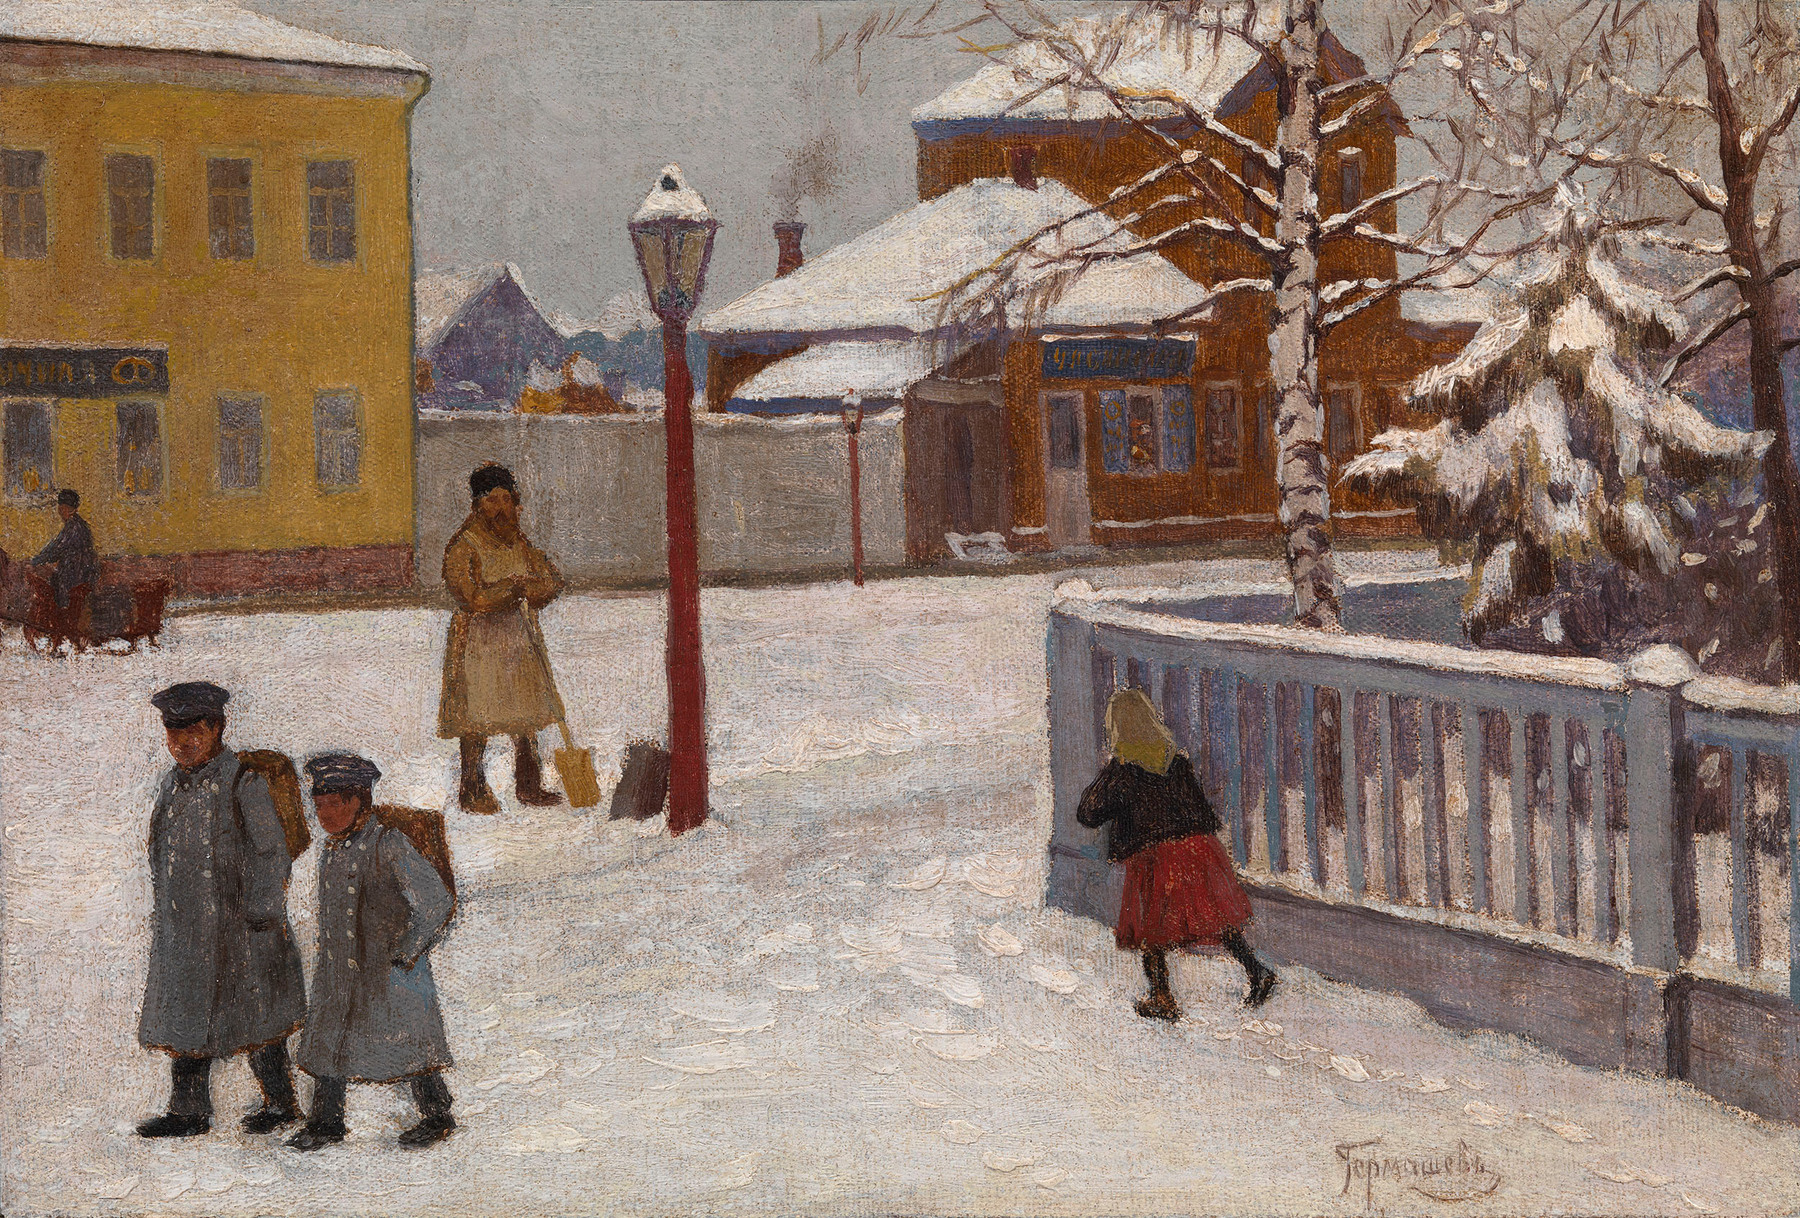 Winter Street Scene and On the Platform, two works